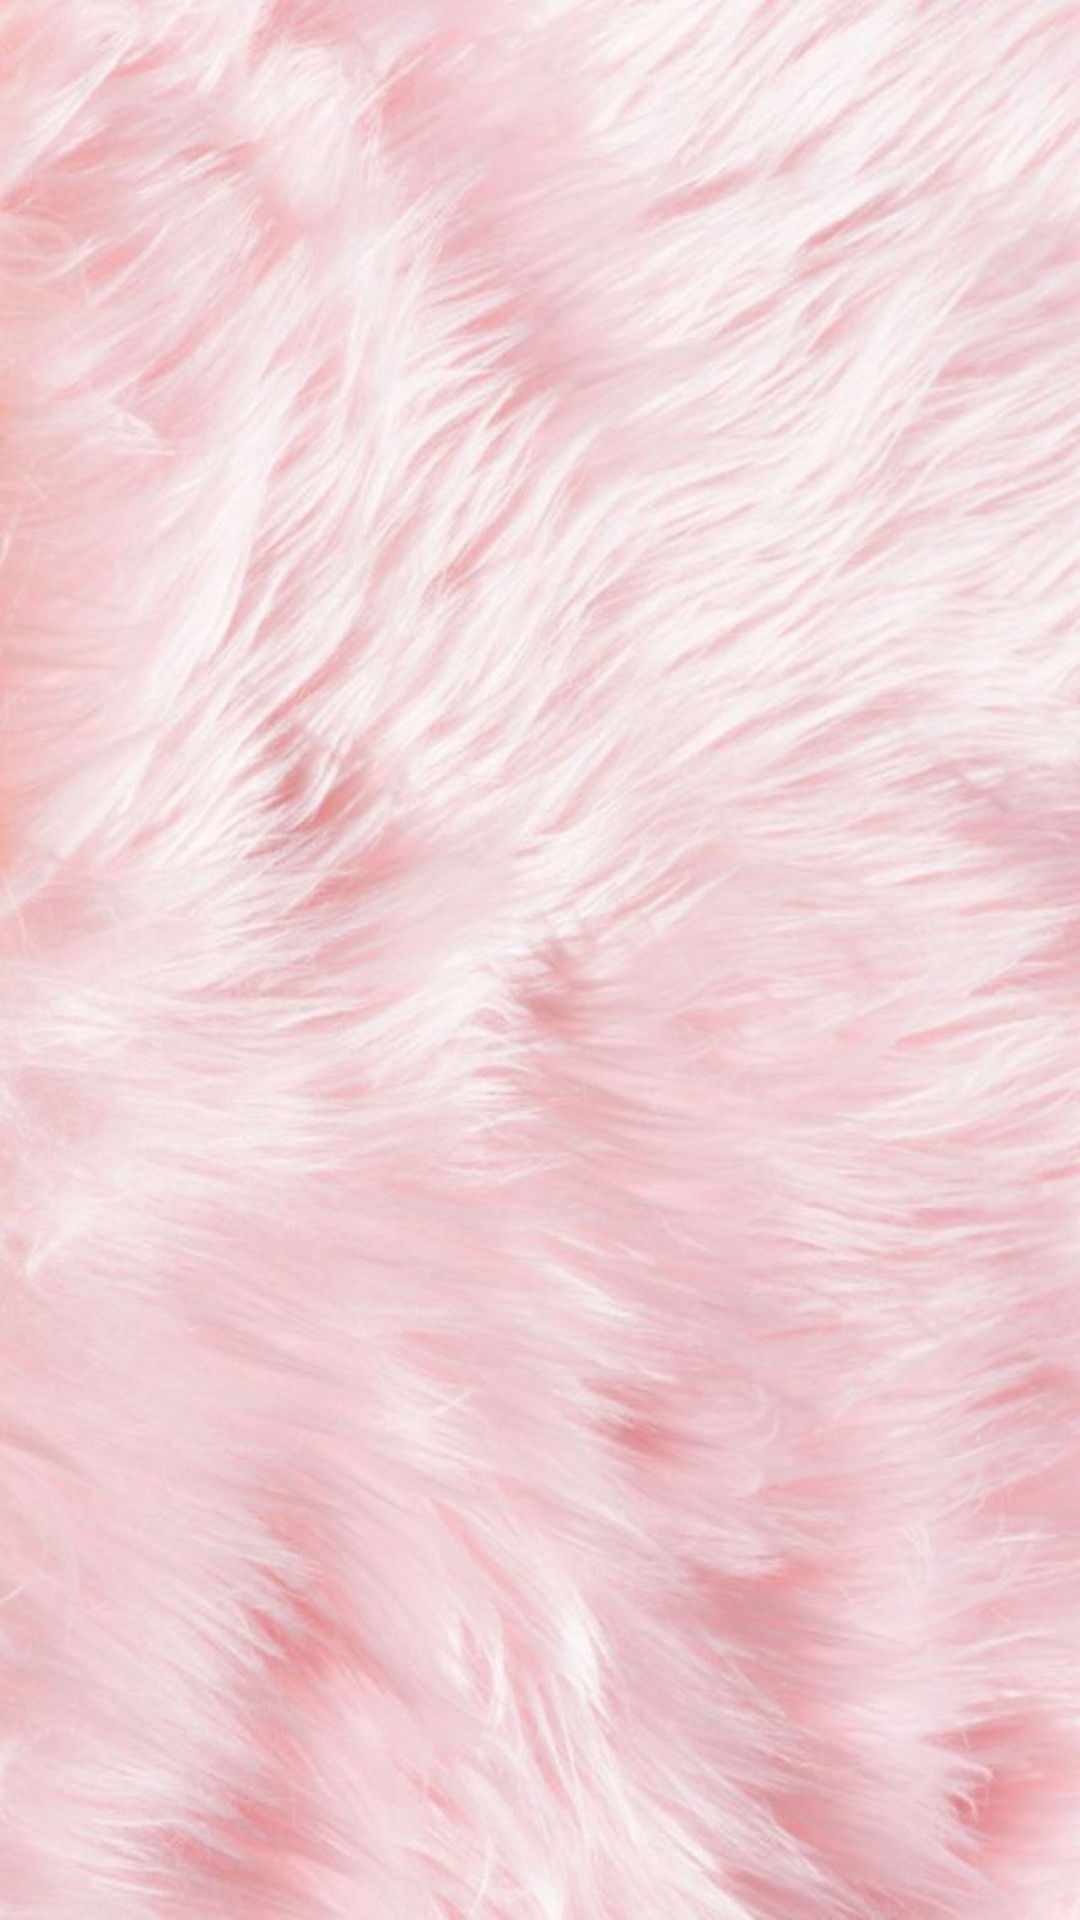 Download Pink Fluffy Fur 1080 x 1920 Wallpapers – 4733578 – fluffy fur pink mobile9